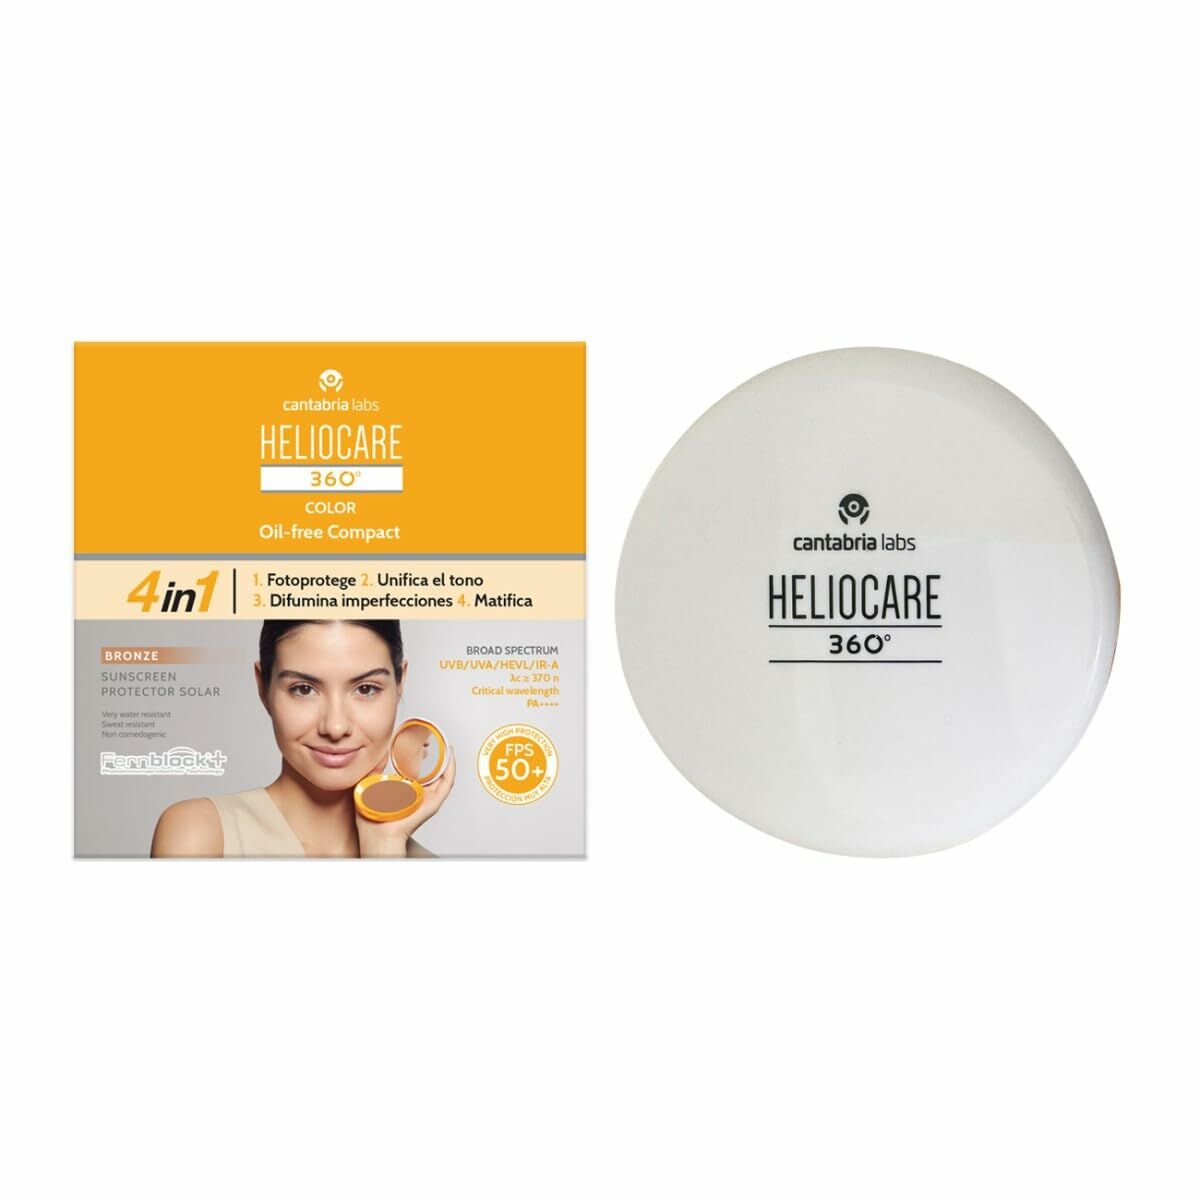 Sun Protection with Colour Heliocare 360 Compact Oil-Free Bronze SPF 50+ 10 g | Heliocare | Aylal Beauty